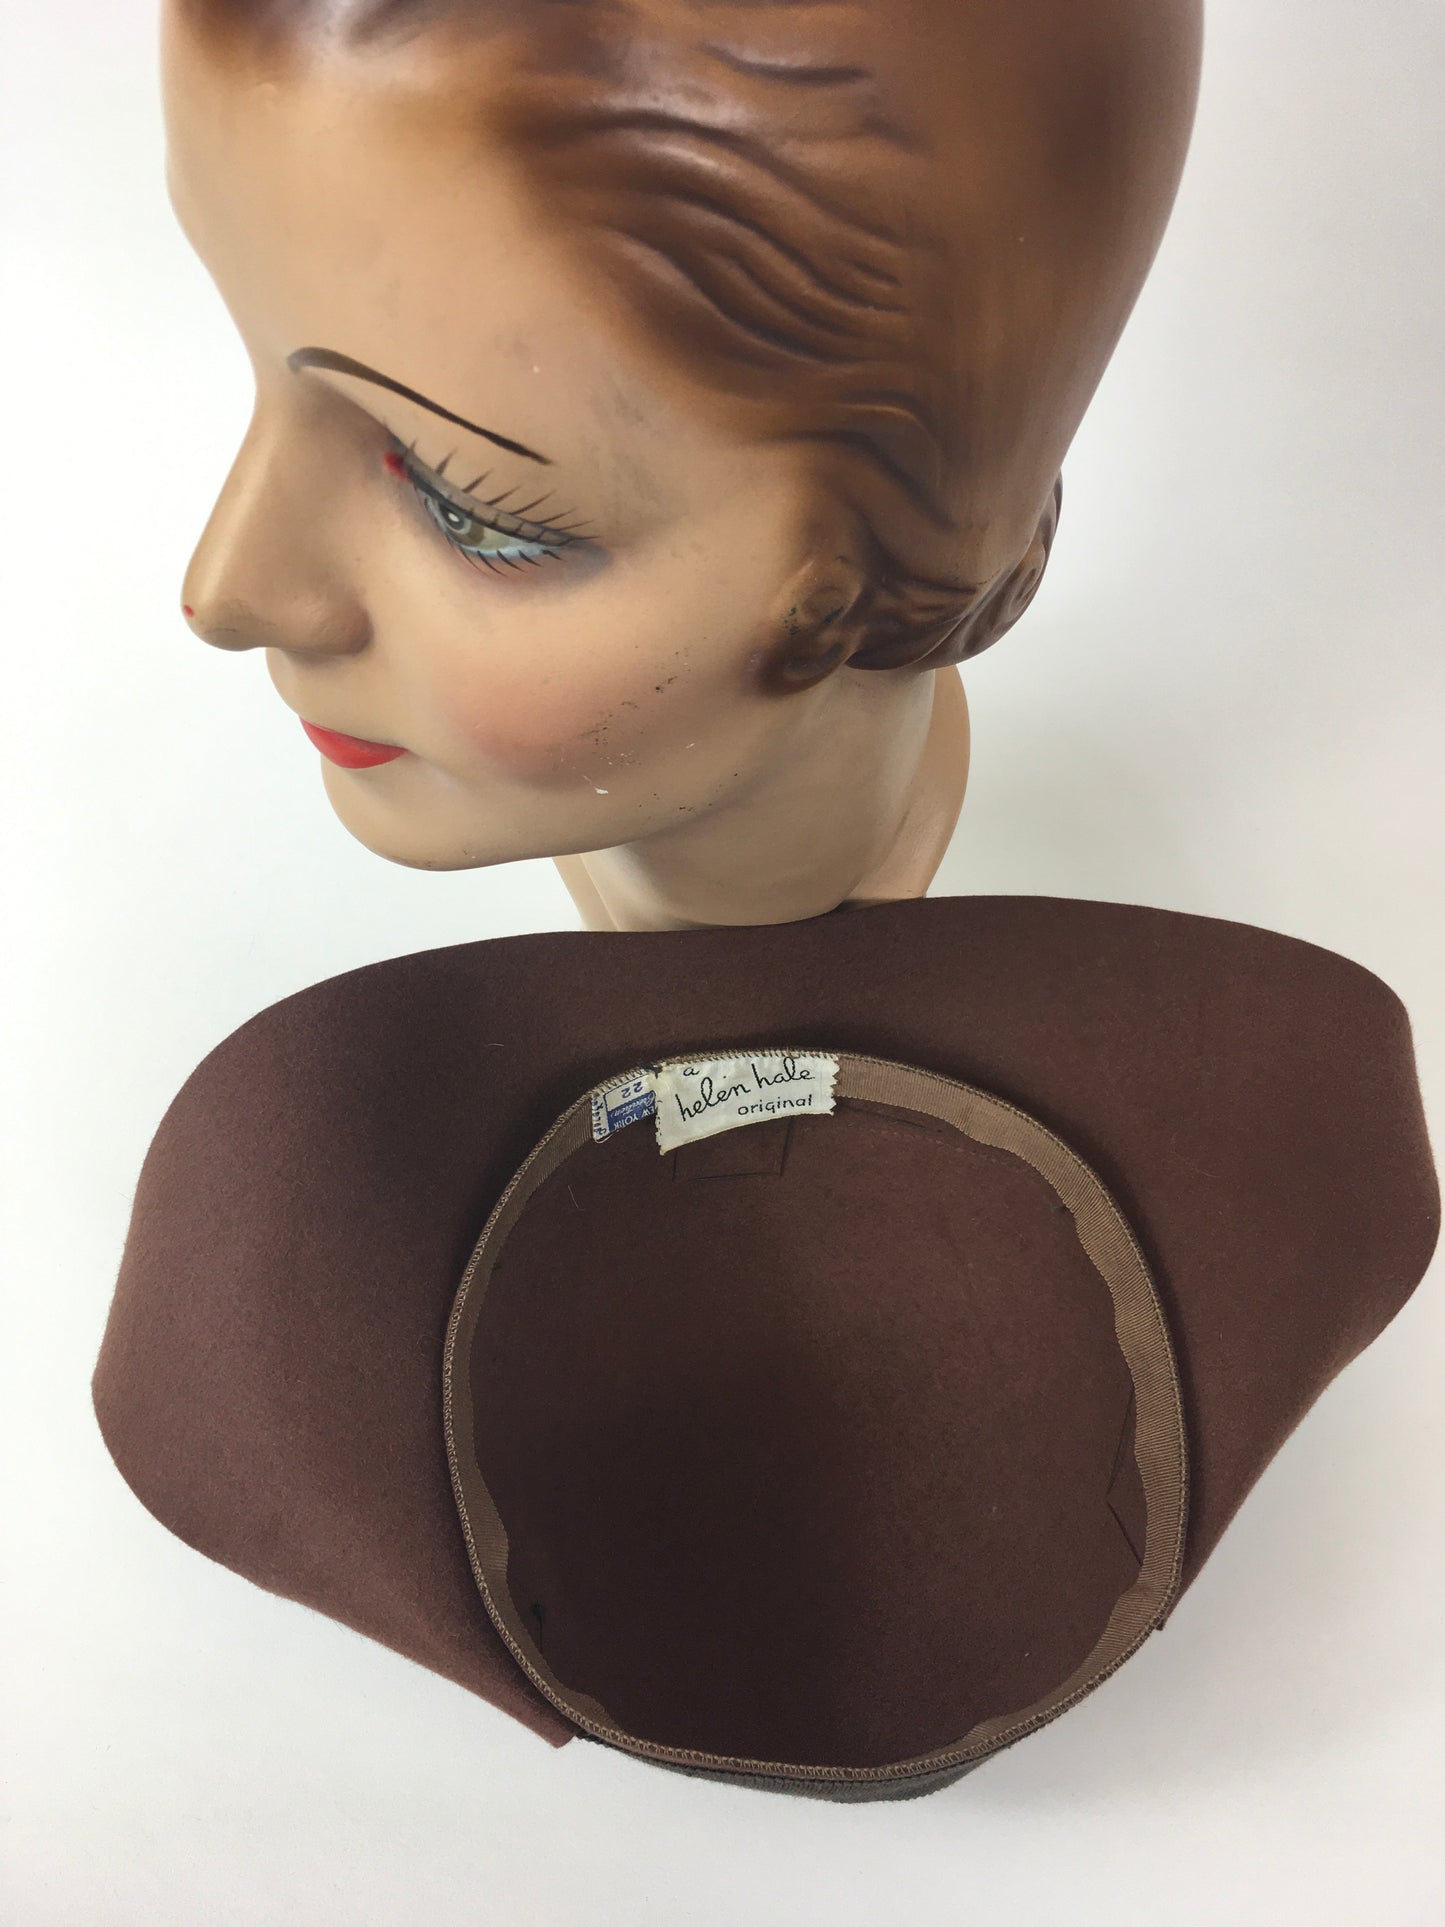 Original 1940’s Quirky Brown Felt Hat - By ‘ New York Creations ‘